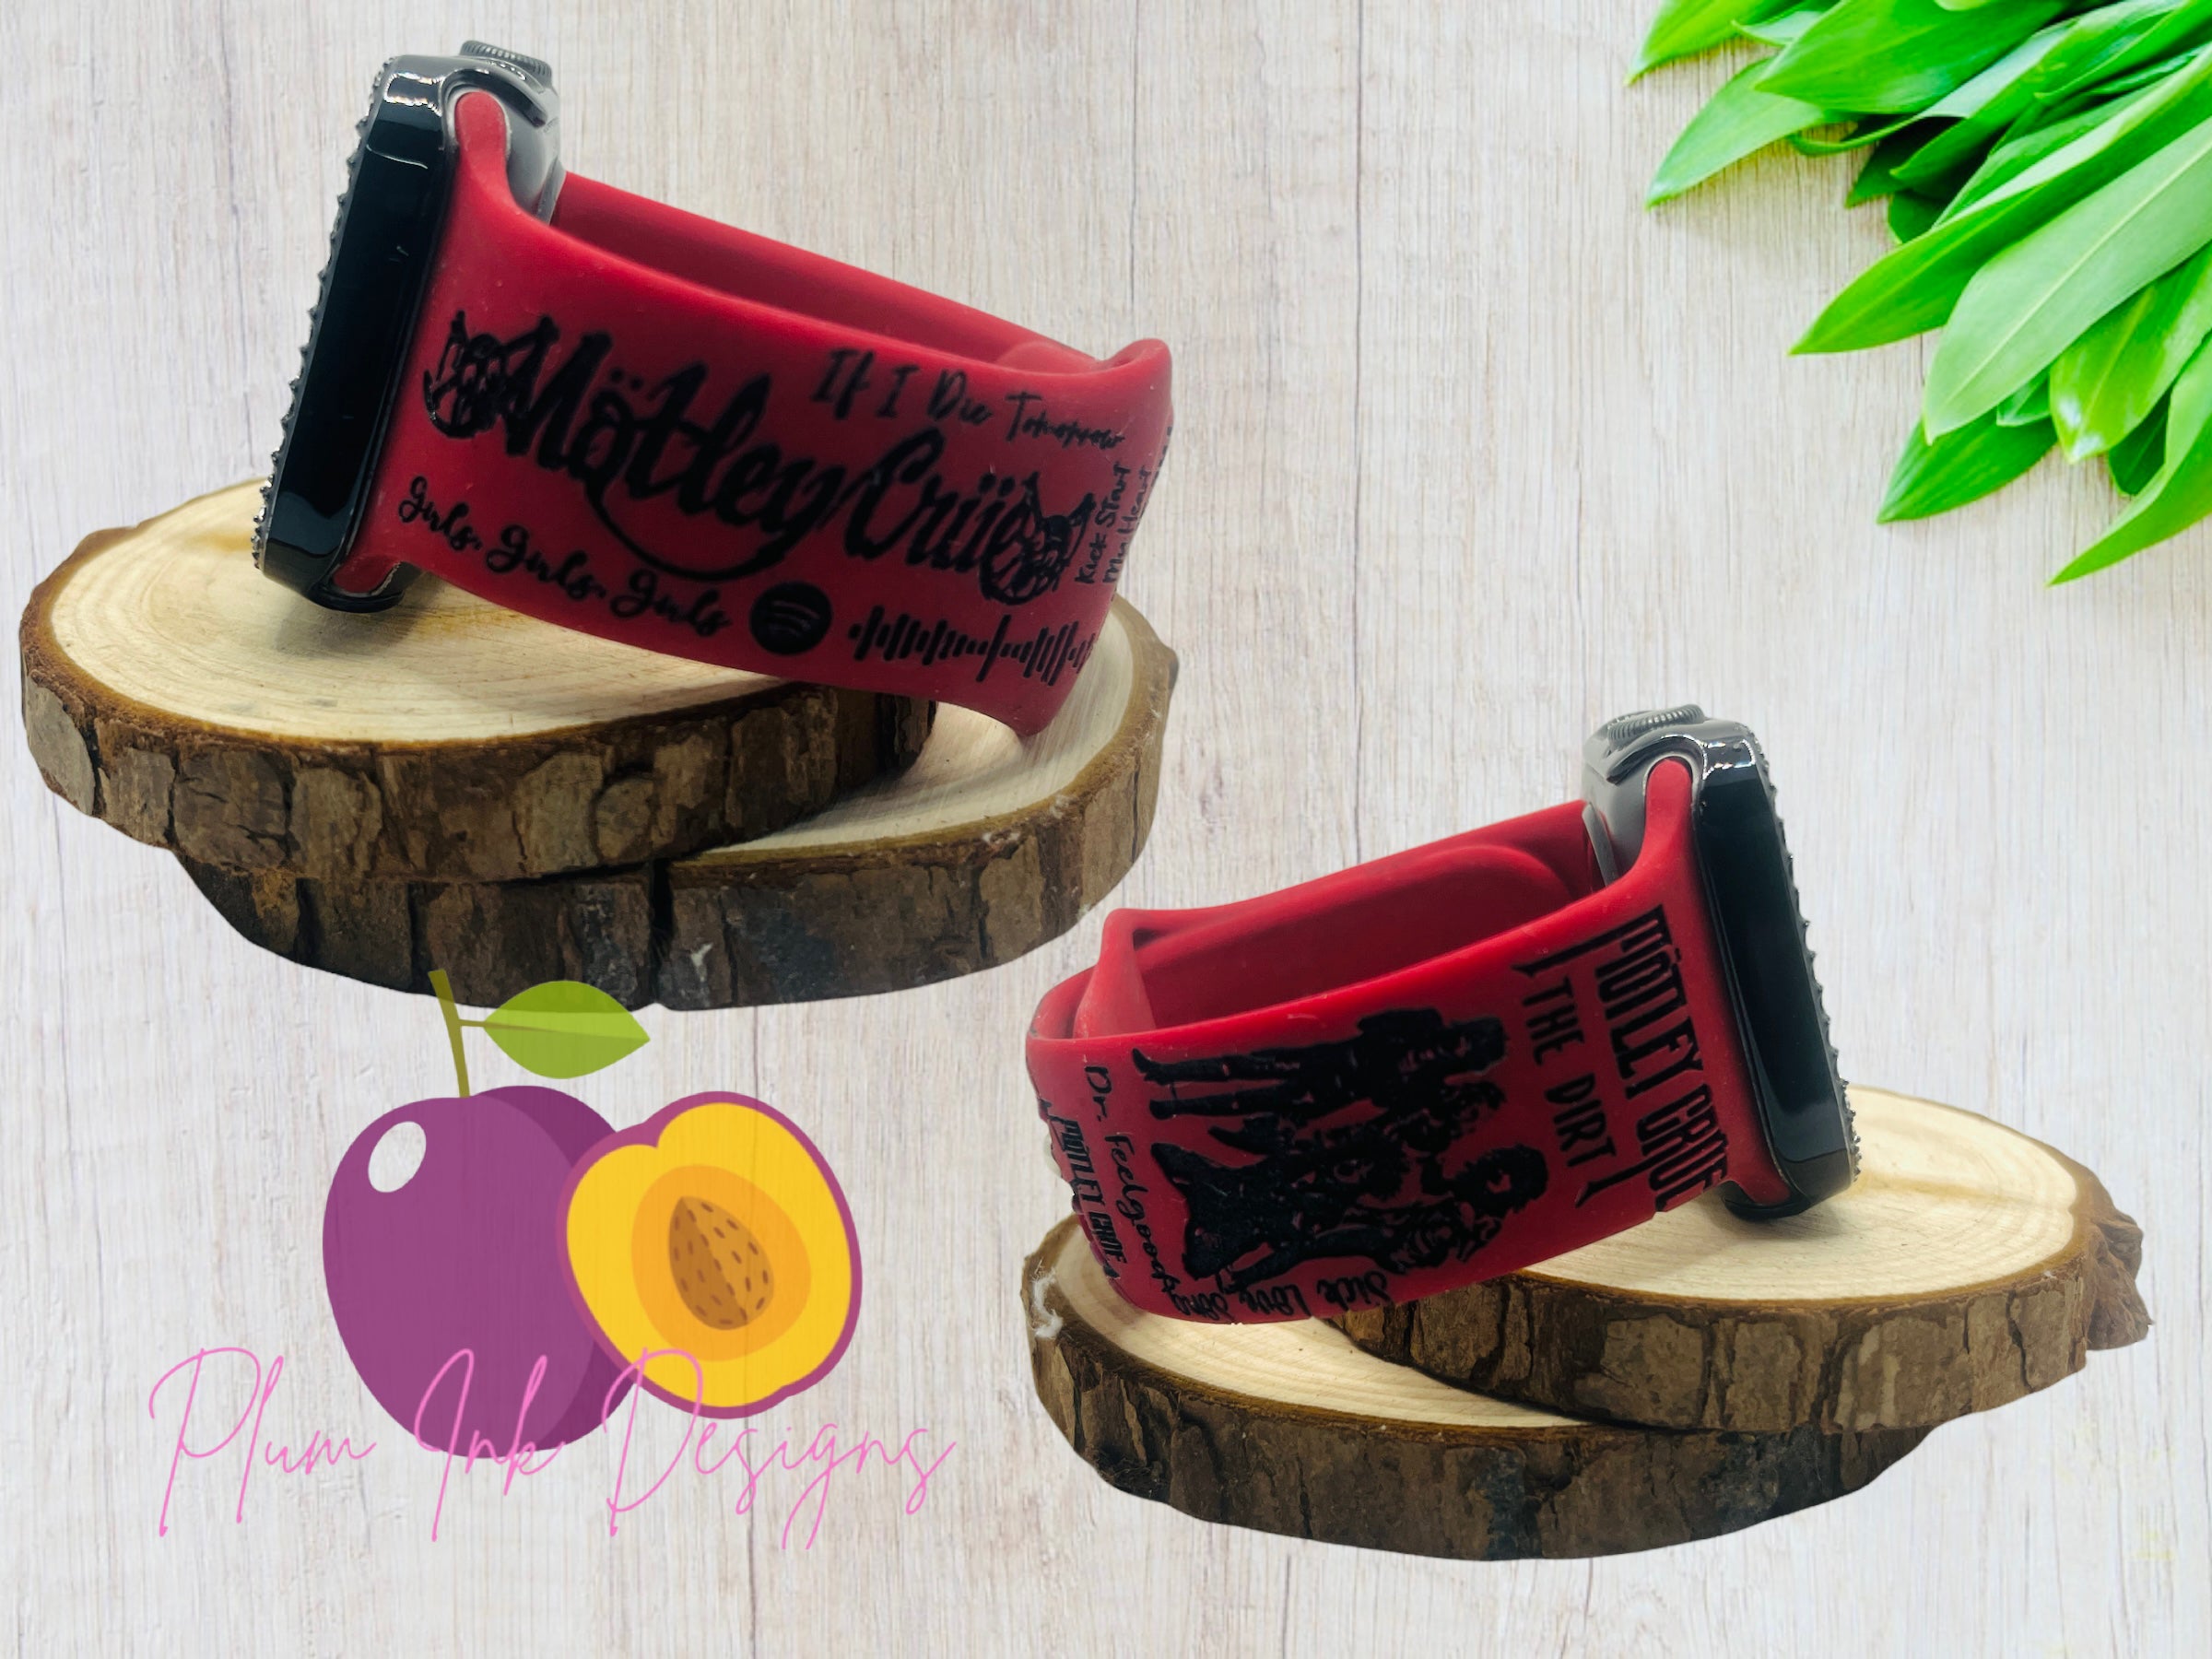 Motley Crue engraved Apple watch band, music theme machine gun Kelly, engraved Samsung Watch band, LV supreme, gift, Fitbit Versa watch, gift for her